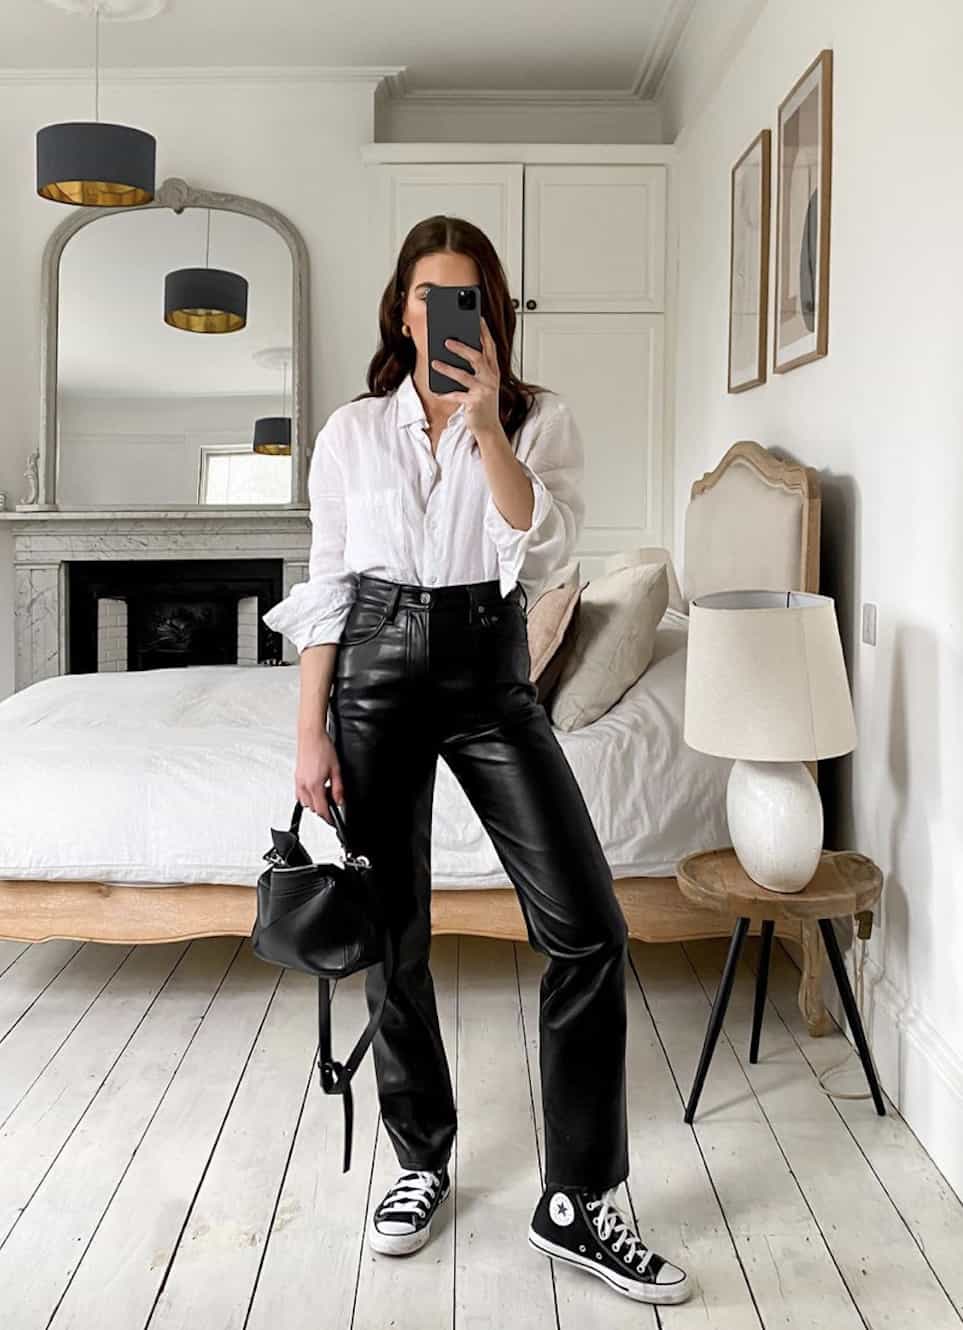 17+ Chic Leather Pants Outfit Ideas That Prove You Need A Pair!